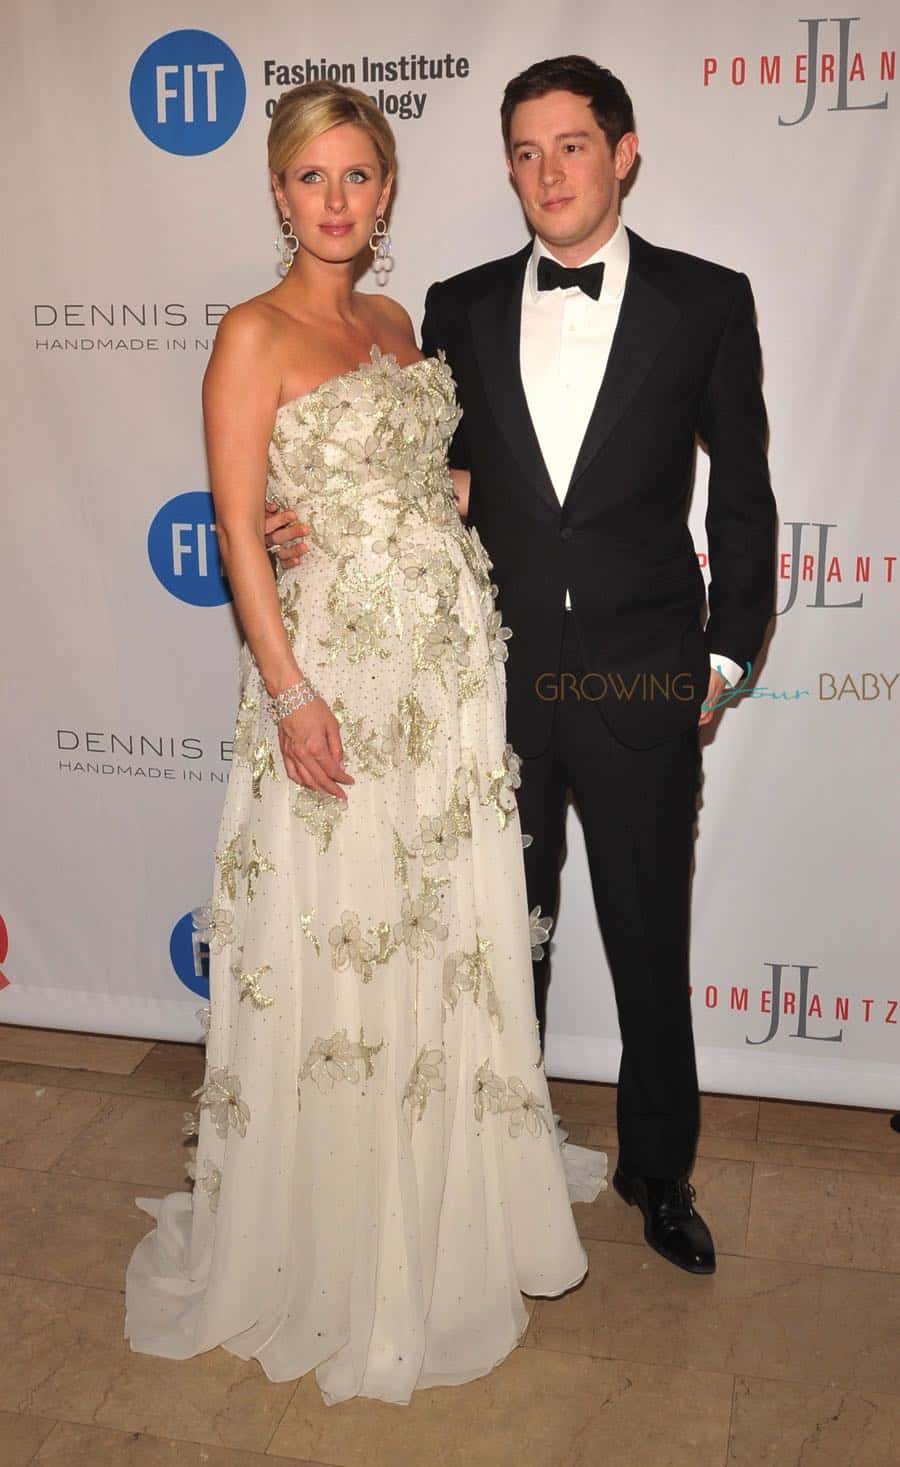 Pregnant Nicky Hilton Rothschild and James Rothschild at the 2016 FIT's Annual Gala in New York city